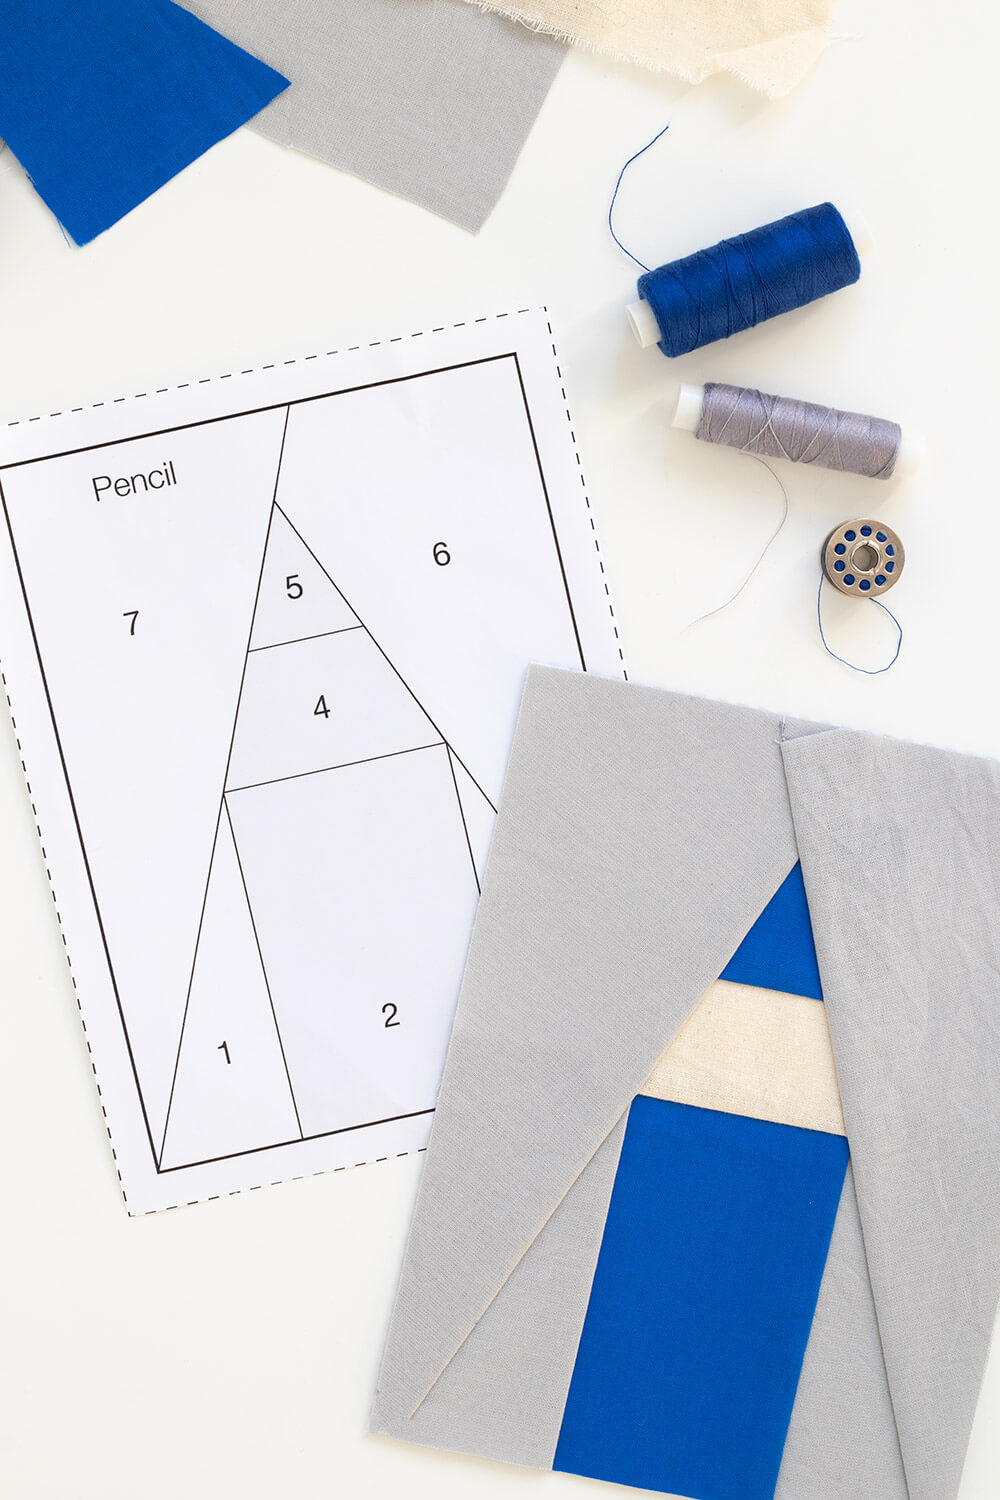 Foundation Paper Piecing - how to 